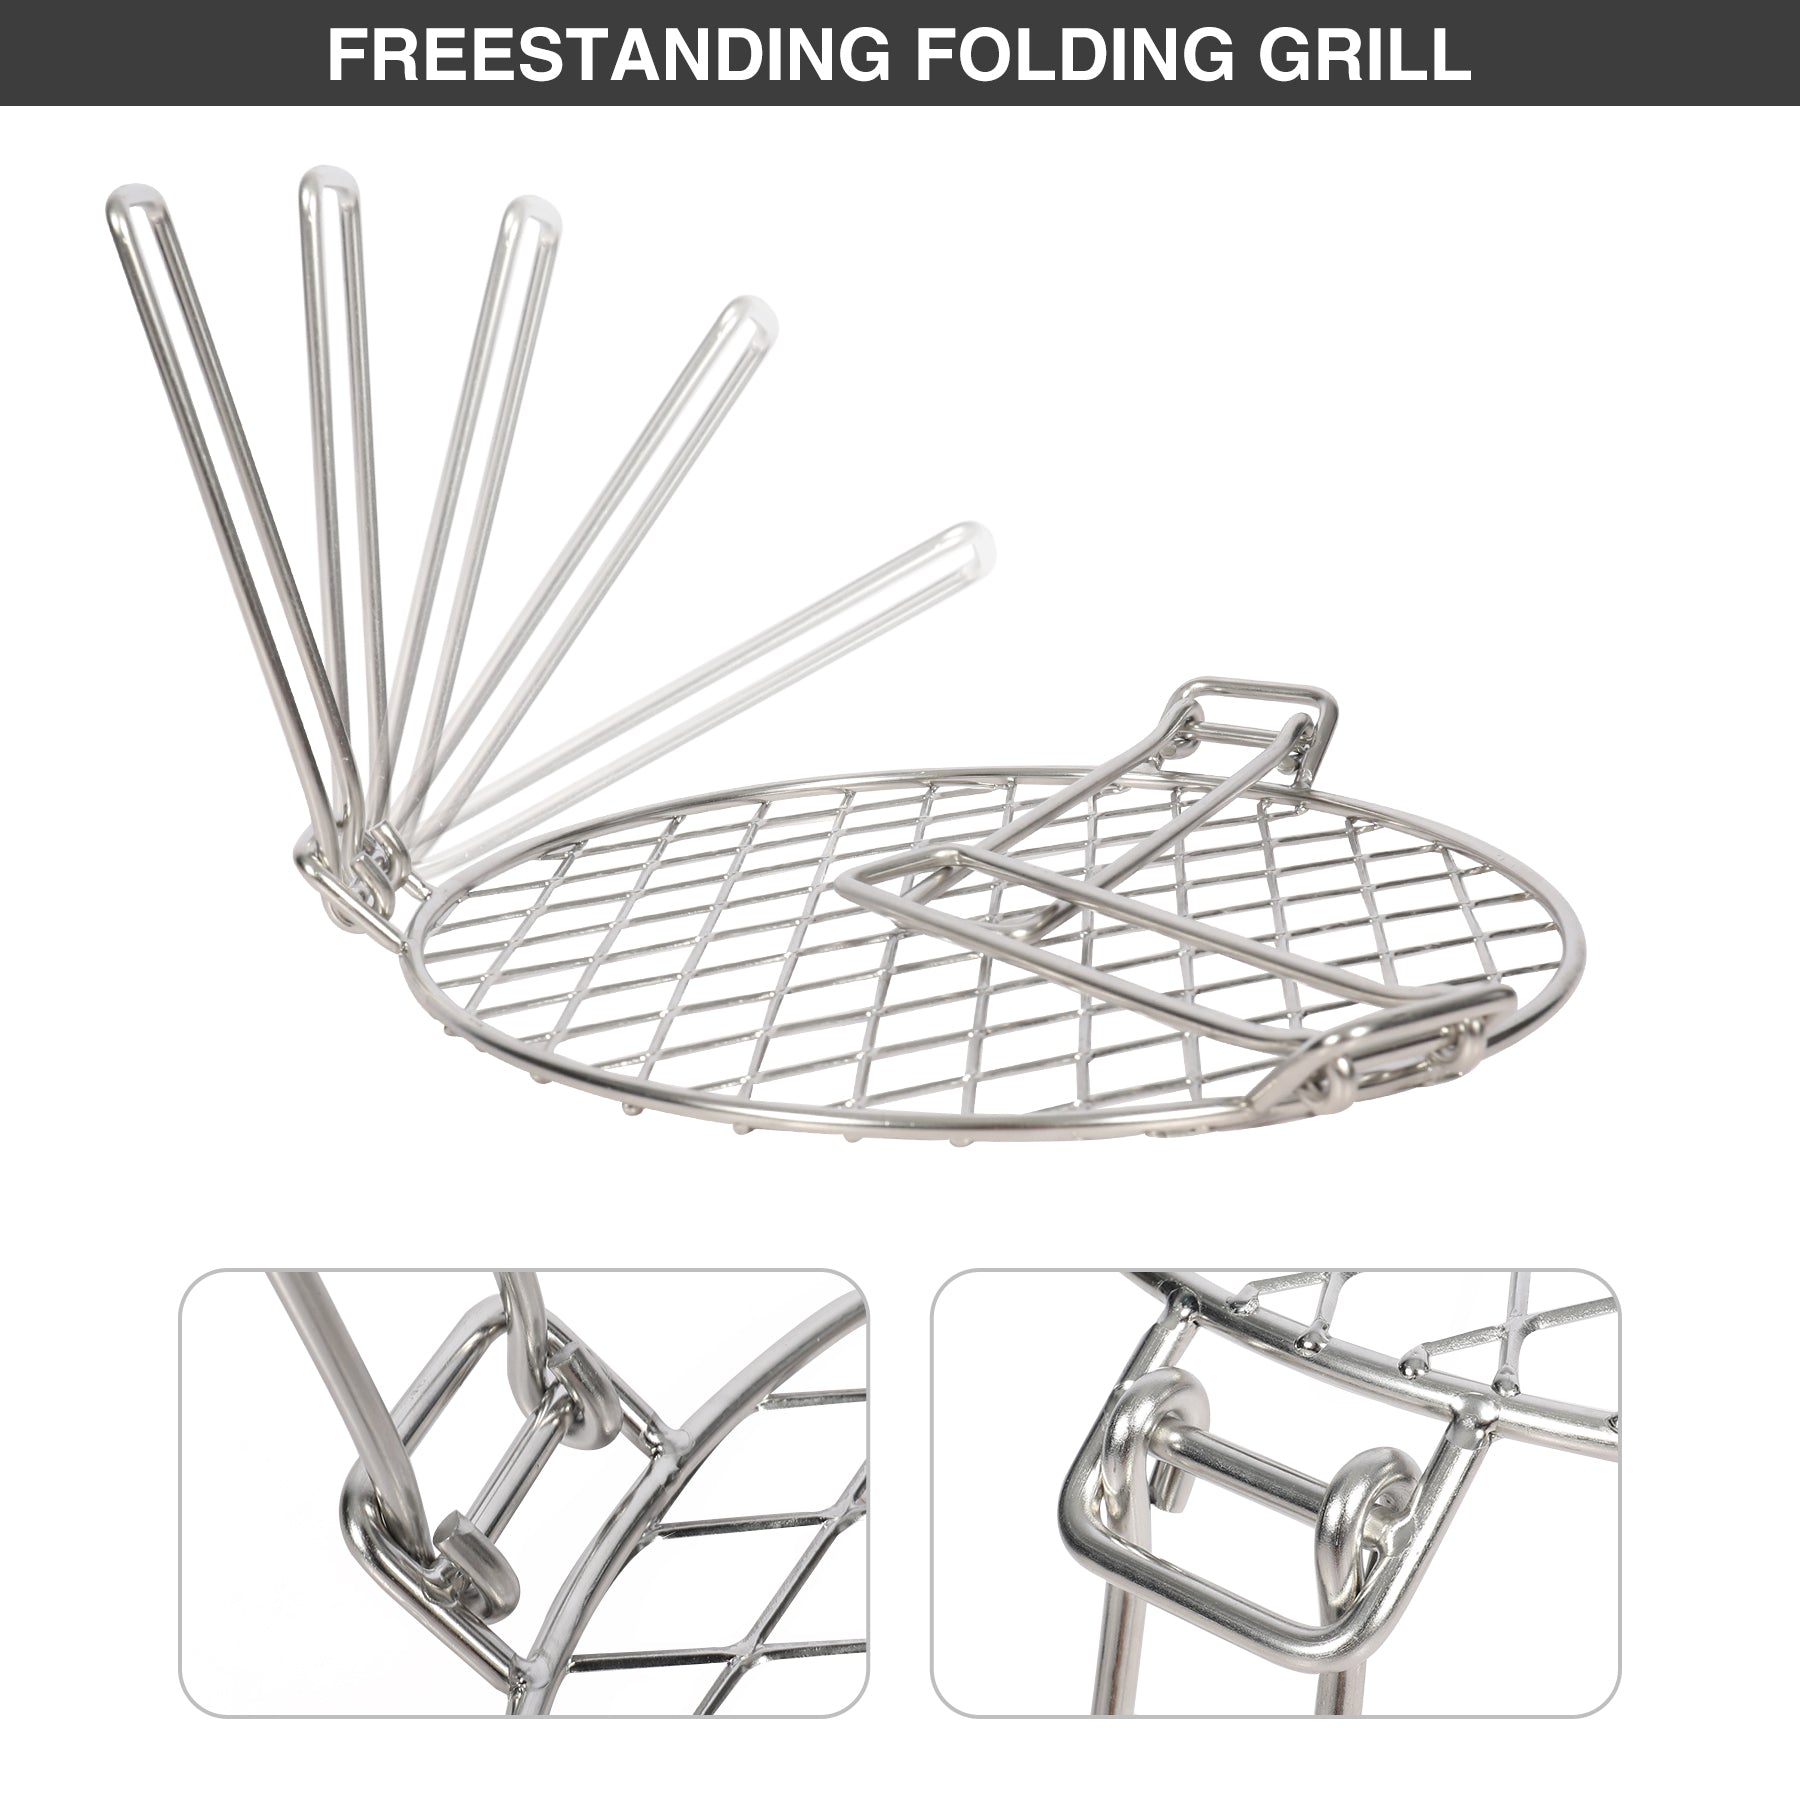 Folding Round Campfire Grill Grate, Portable Over Fire Camp Grill with Foldable Legs, 12”